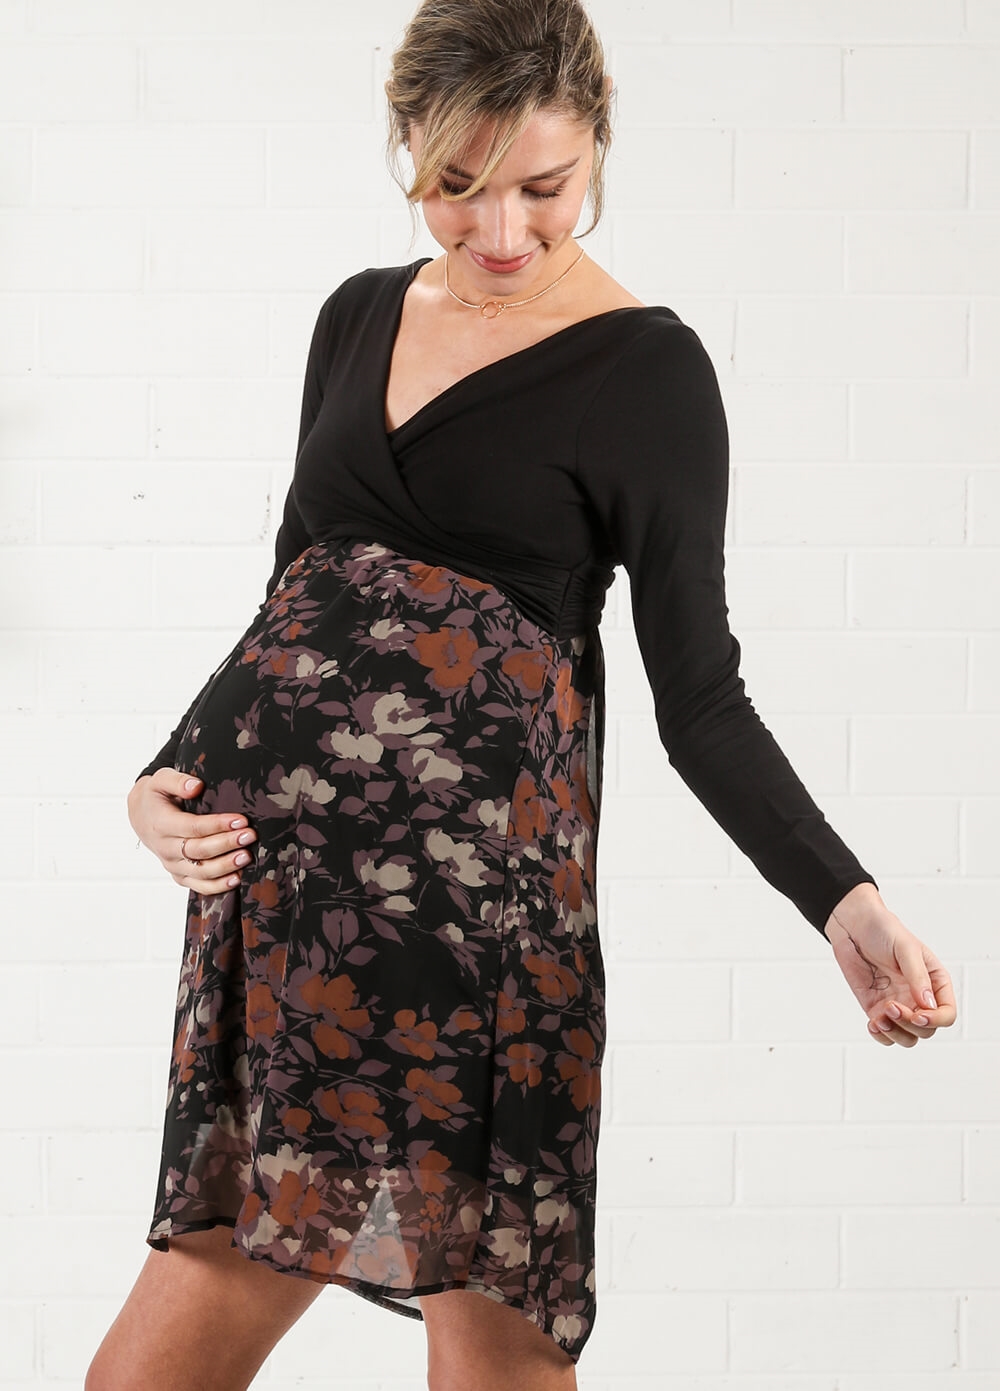 Crossover Maternity Dress in Black/Lilac Floral by Maternal America 